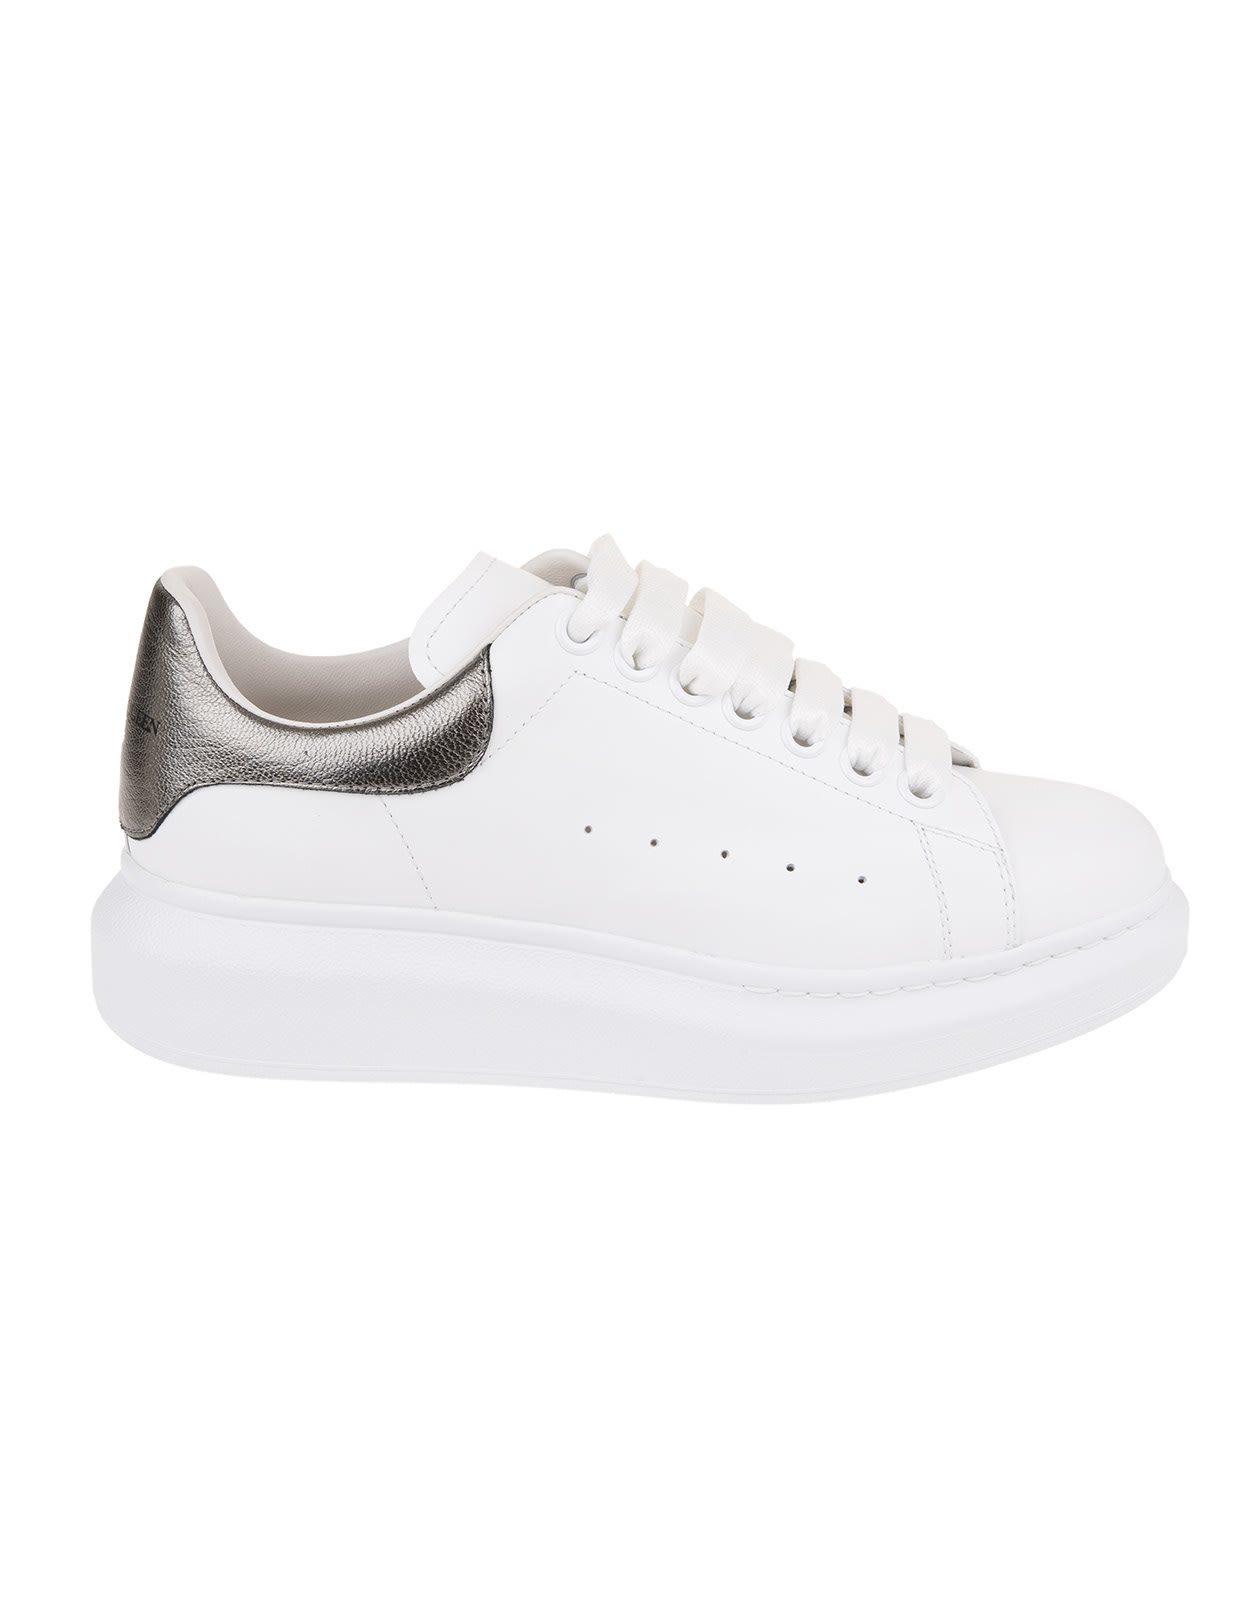 Buy Alexander McQueen Woman White And Metallic Grey Oversize Sneakers online, shop Alexander McQueen shoes with free shipping